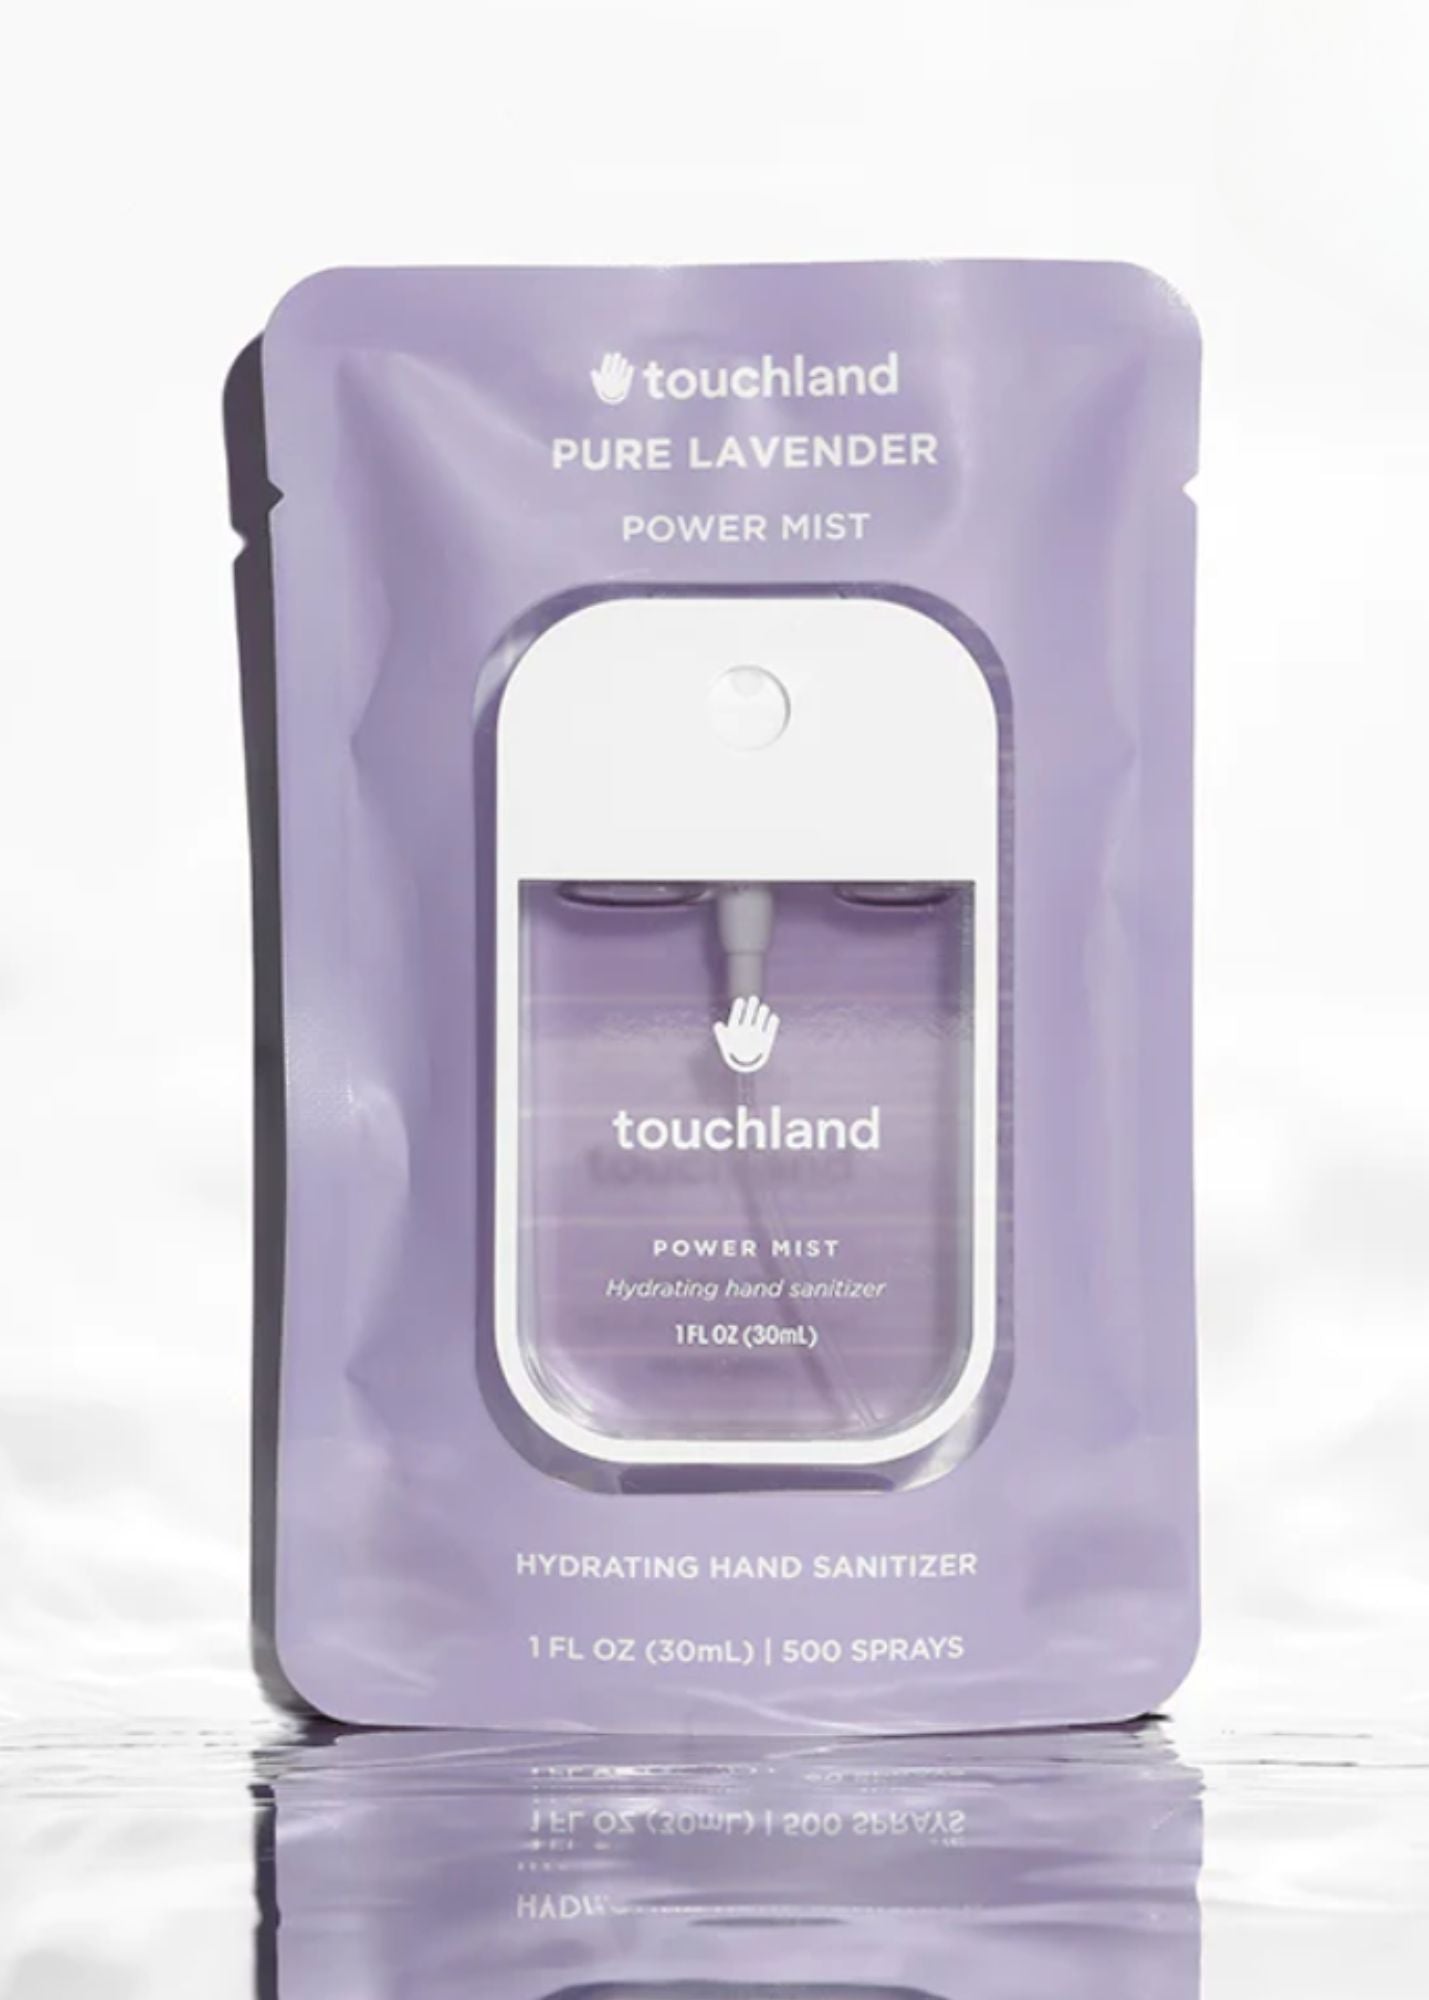 Touchland Power Mist Hand Sanitizer Gifts Pure Lavender